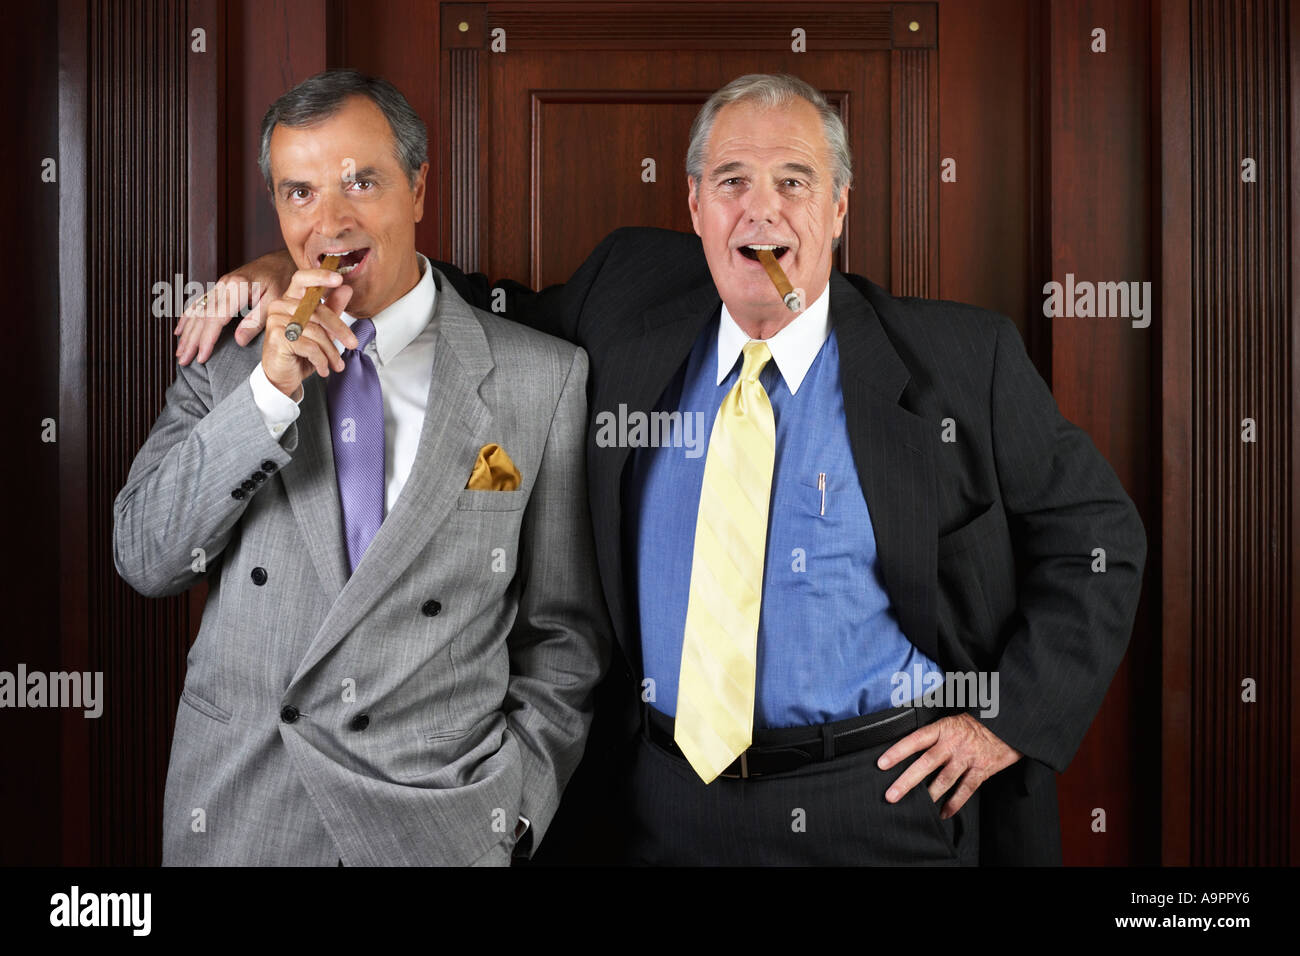 Portrait of two ceo's smoking cigars Stock Photo